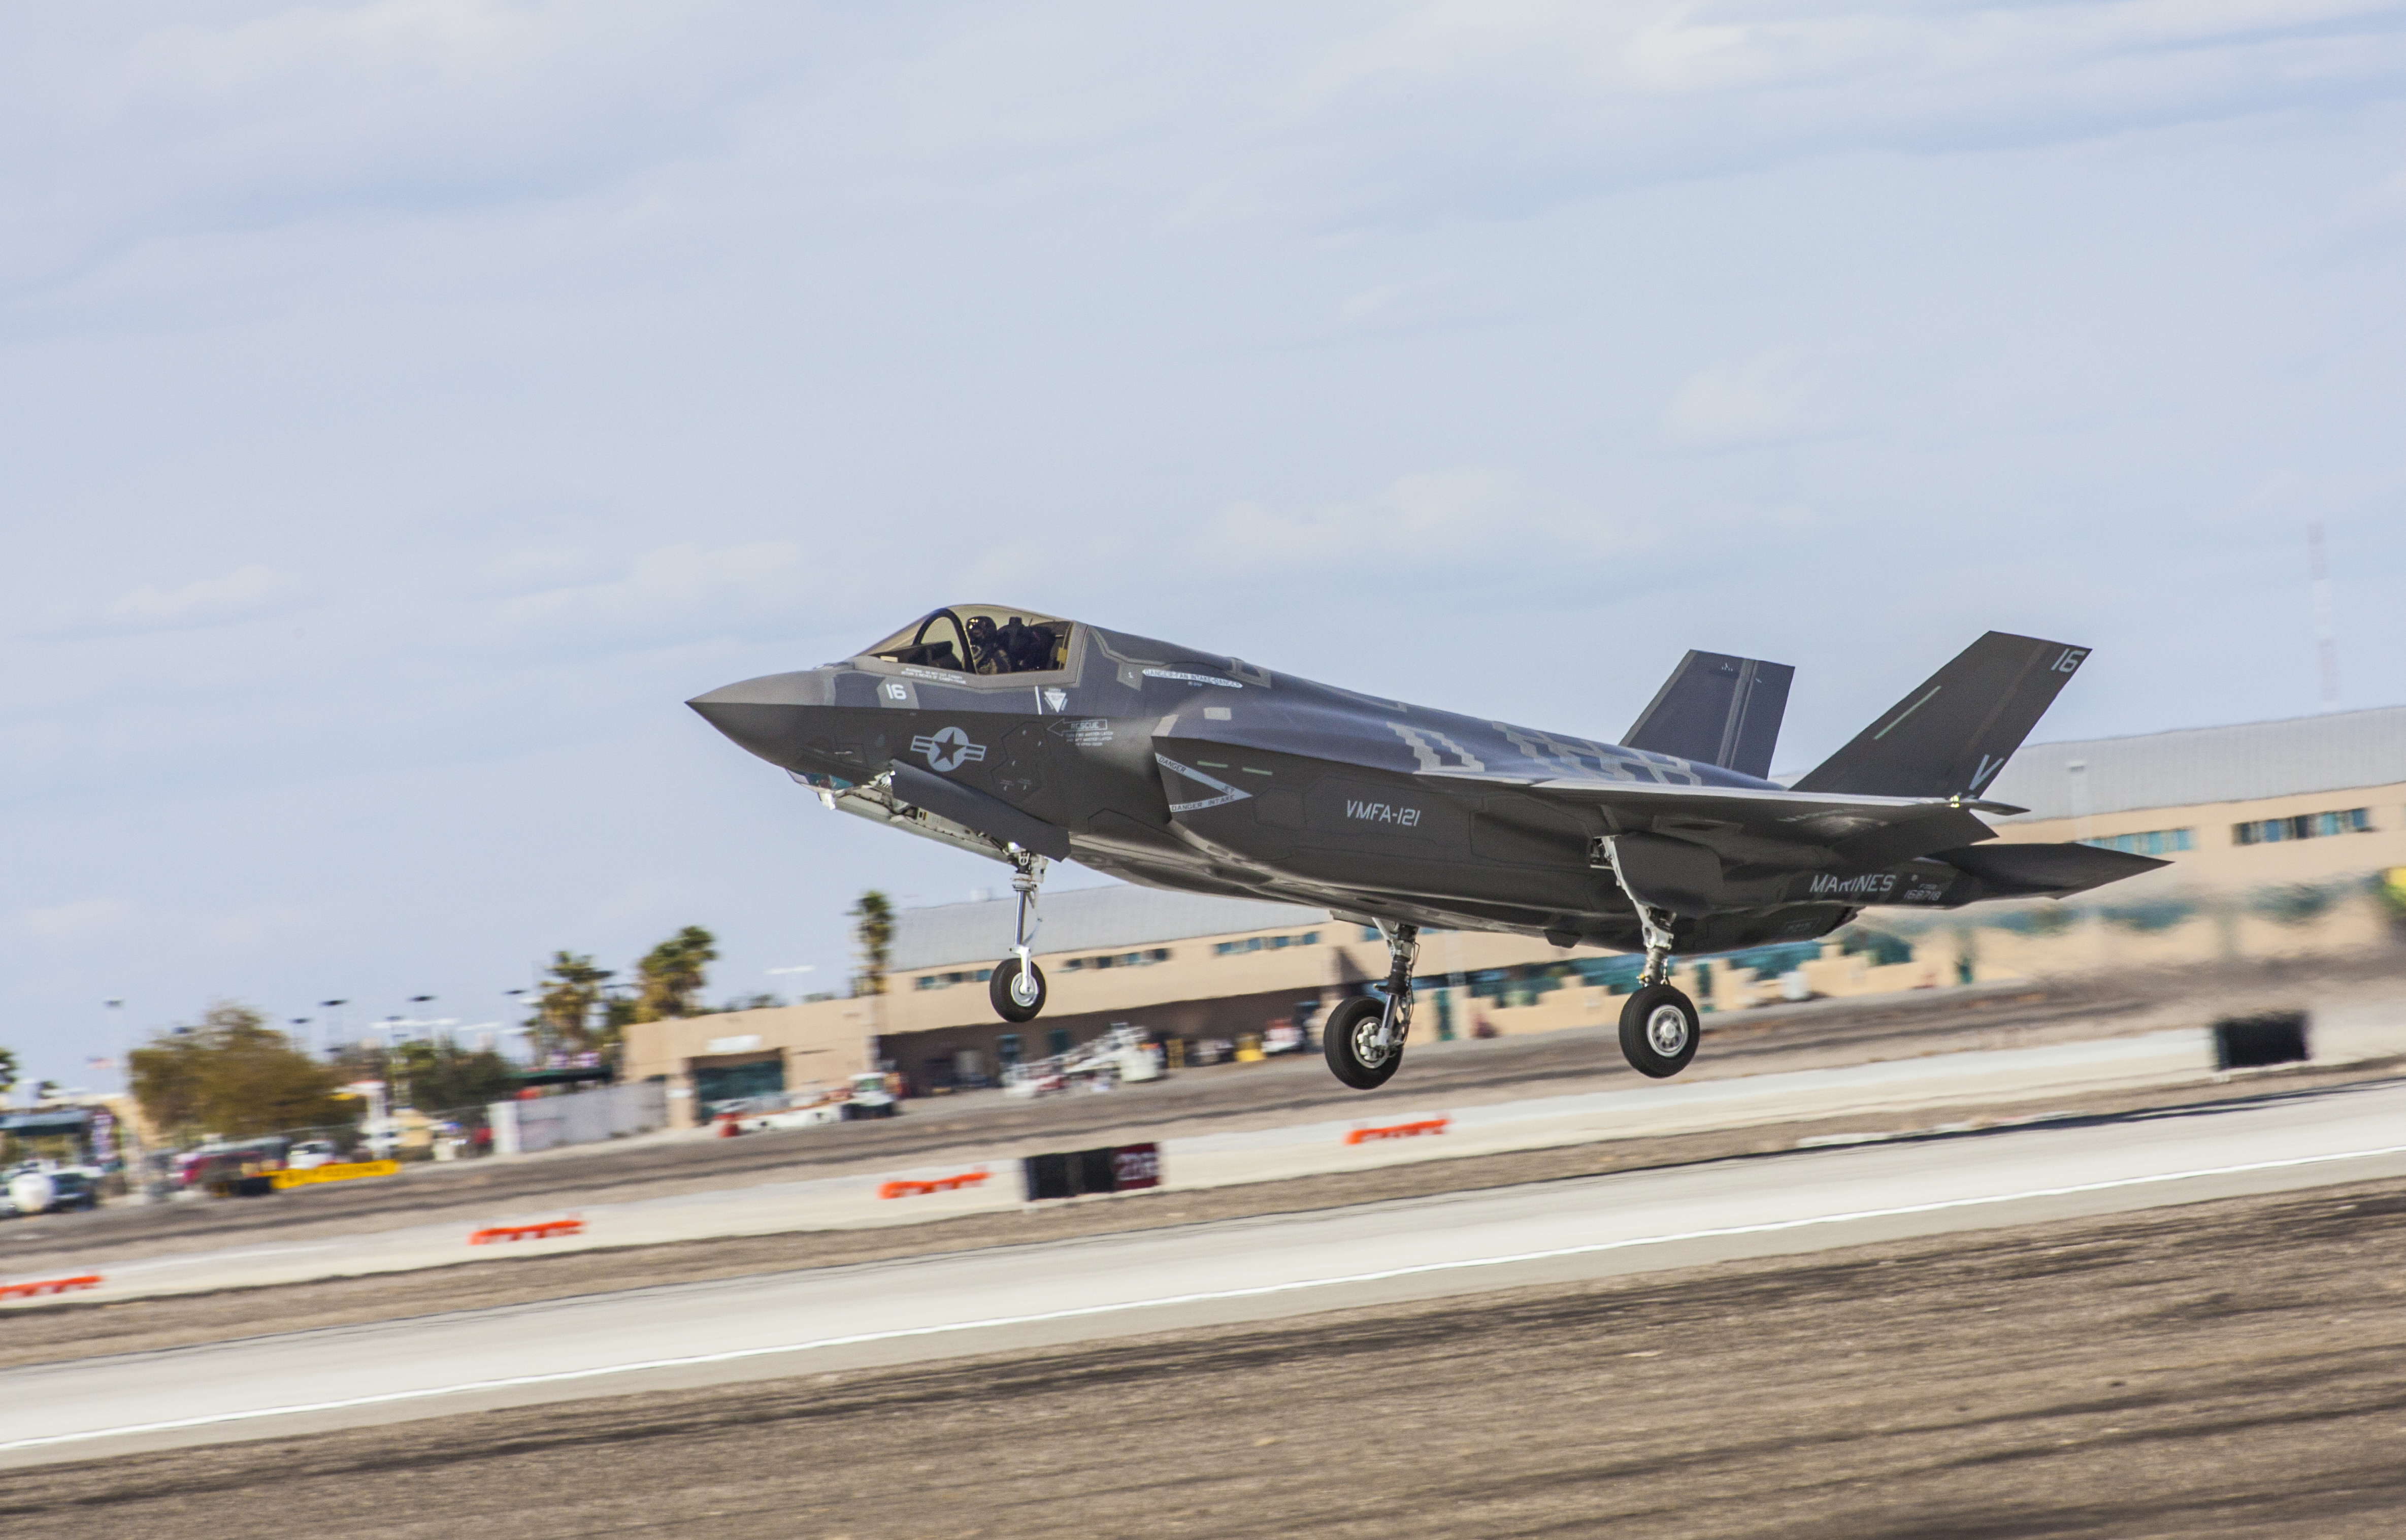 An F-35B Joint Strike Fighter from Marine Fighter Attack Squadron 121 takes off from Marine Corps Air Station Yuma, Ariz., launching the squadron's first orientation flight, Feb. 21, 2013. US Marine Corps photo.